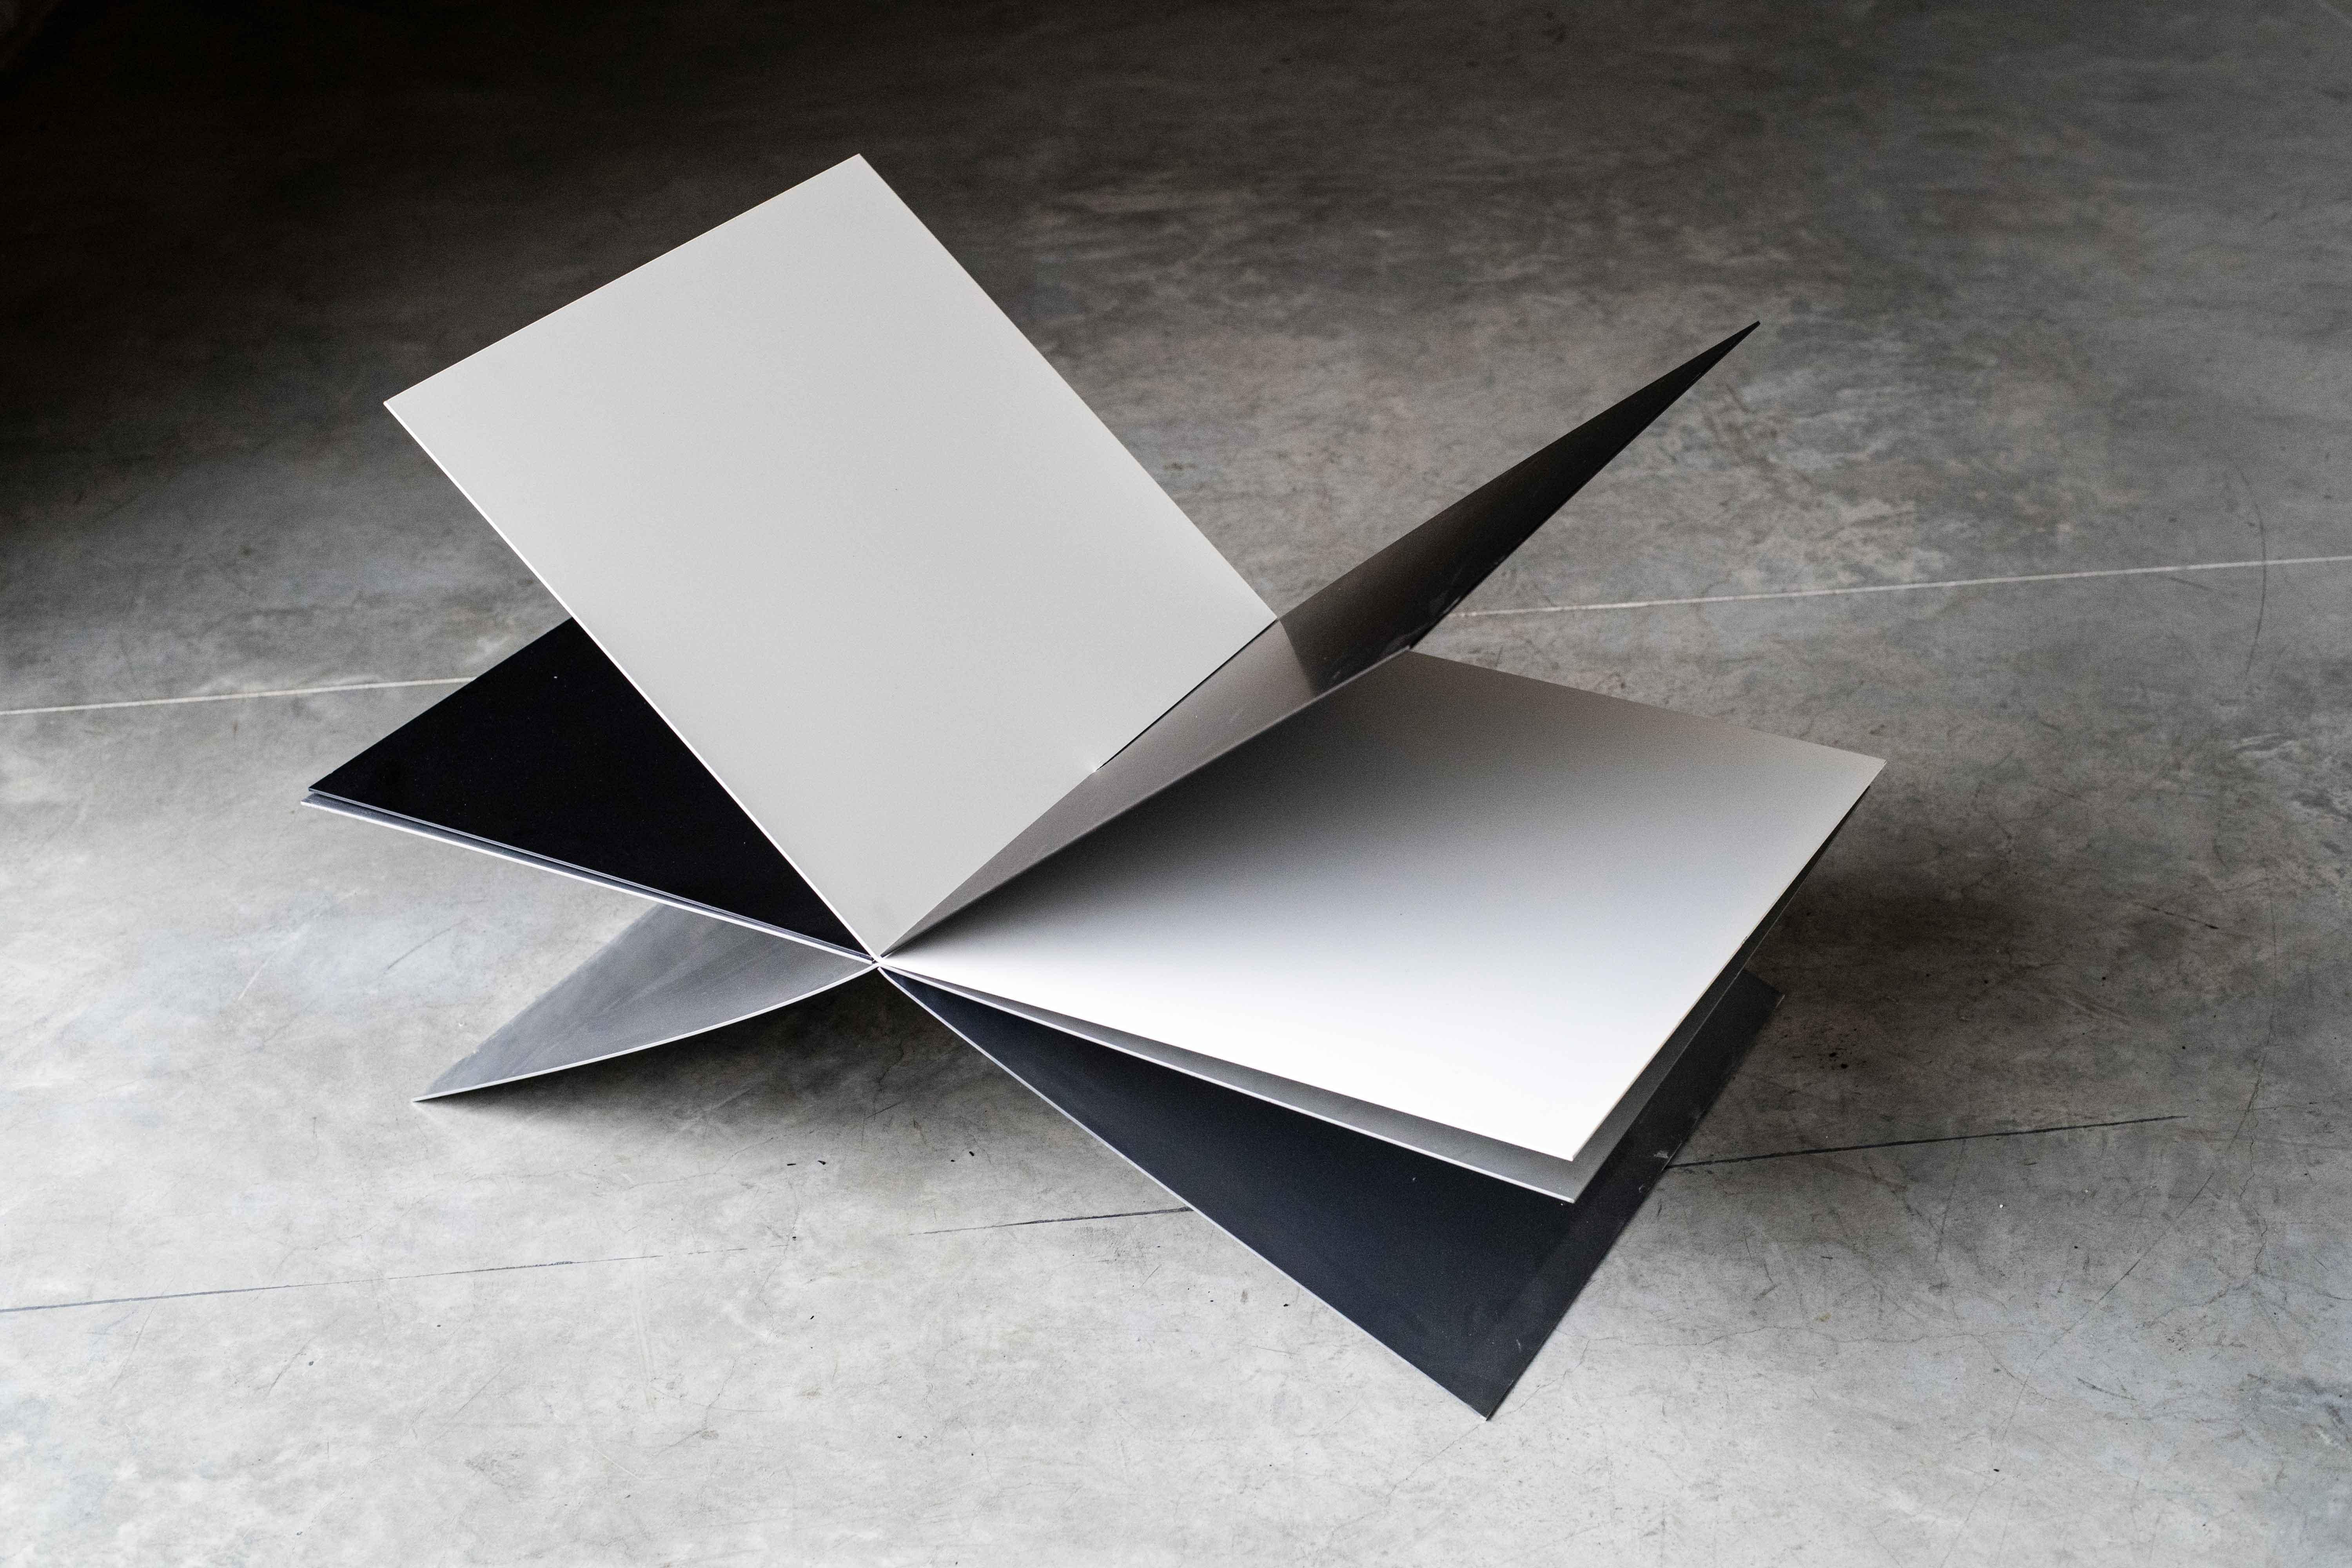 Book table by MOB 
Limited editions of 15 + 1 prototype
Designer: Fernanda Fragateiro (Portugal)
Dimensions: H 100 x D 57 x W 70 cm
Material: 10mm steel sheet, black and white powder coating, Eco-chrome painting

Thinking of a table to place